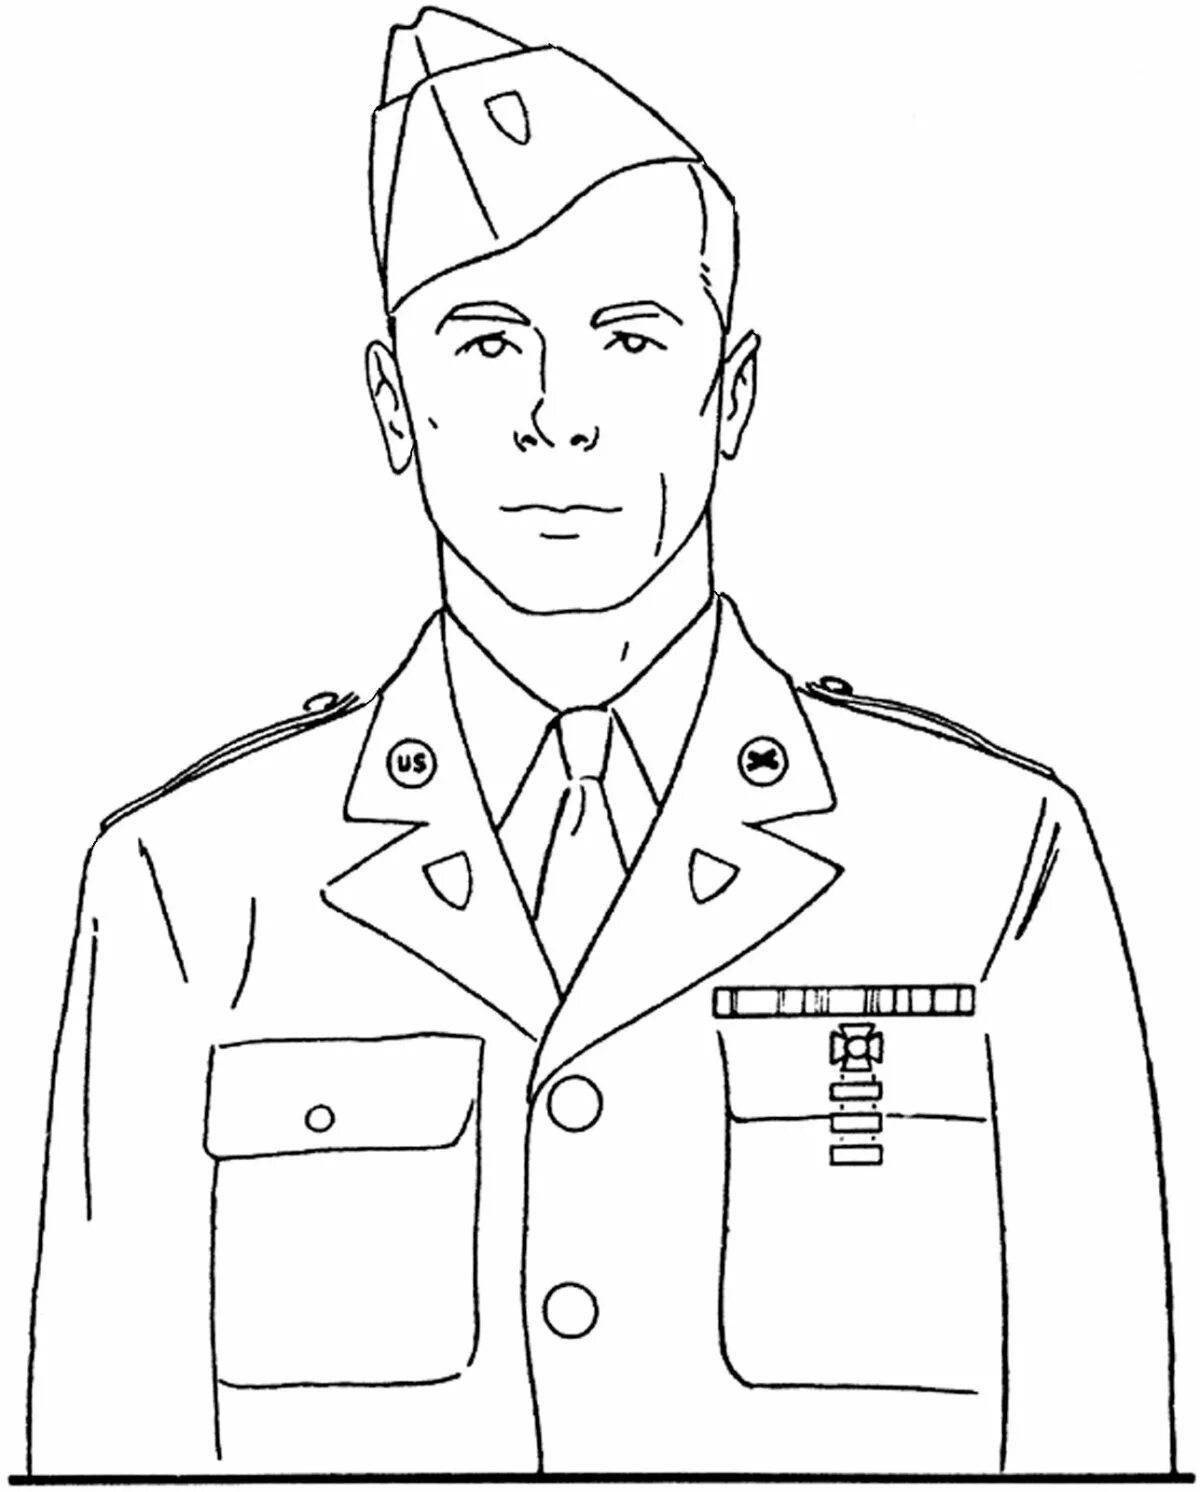 Colorful soldier face coloring page